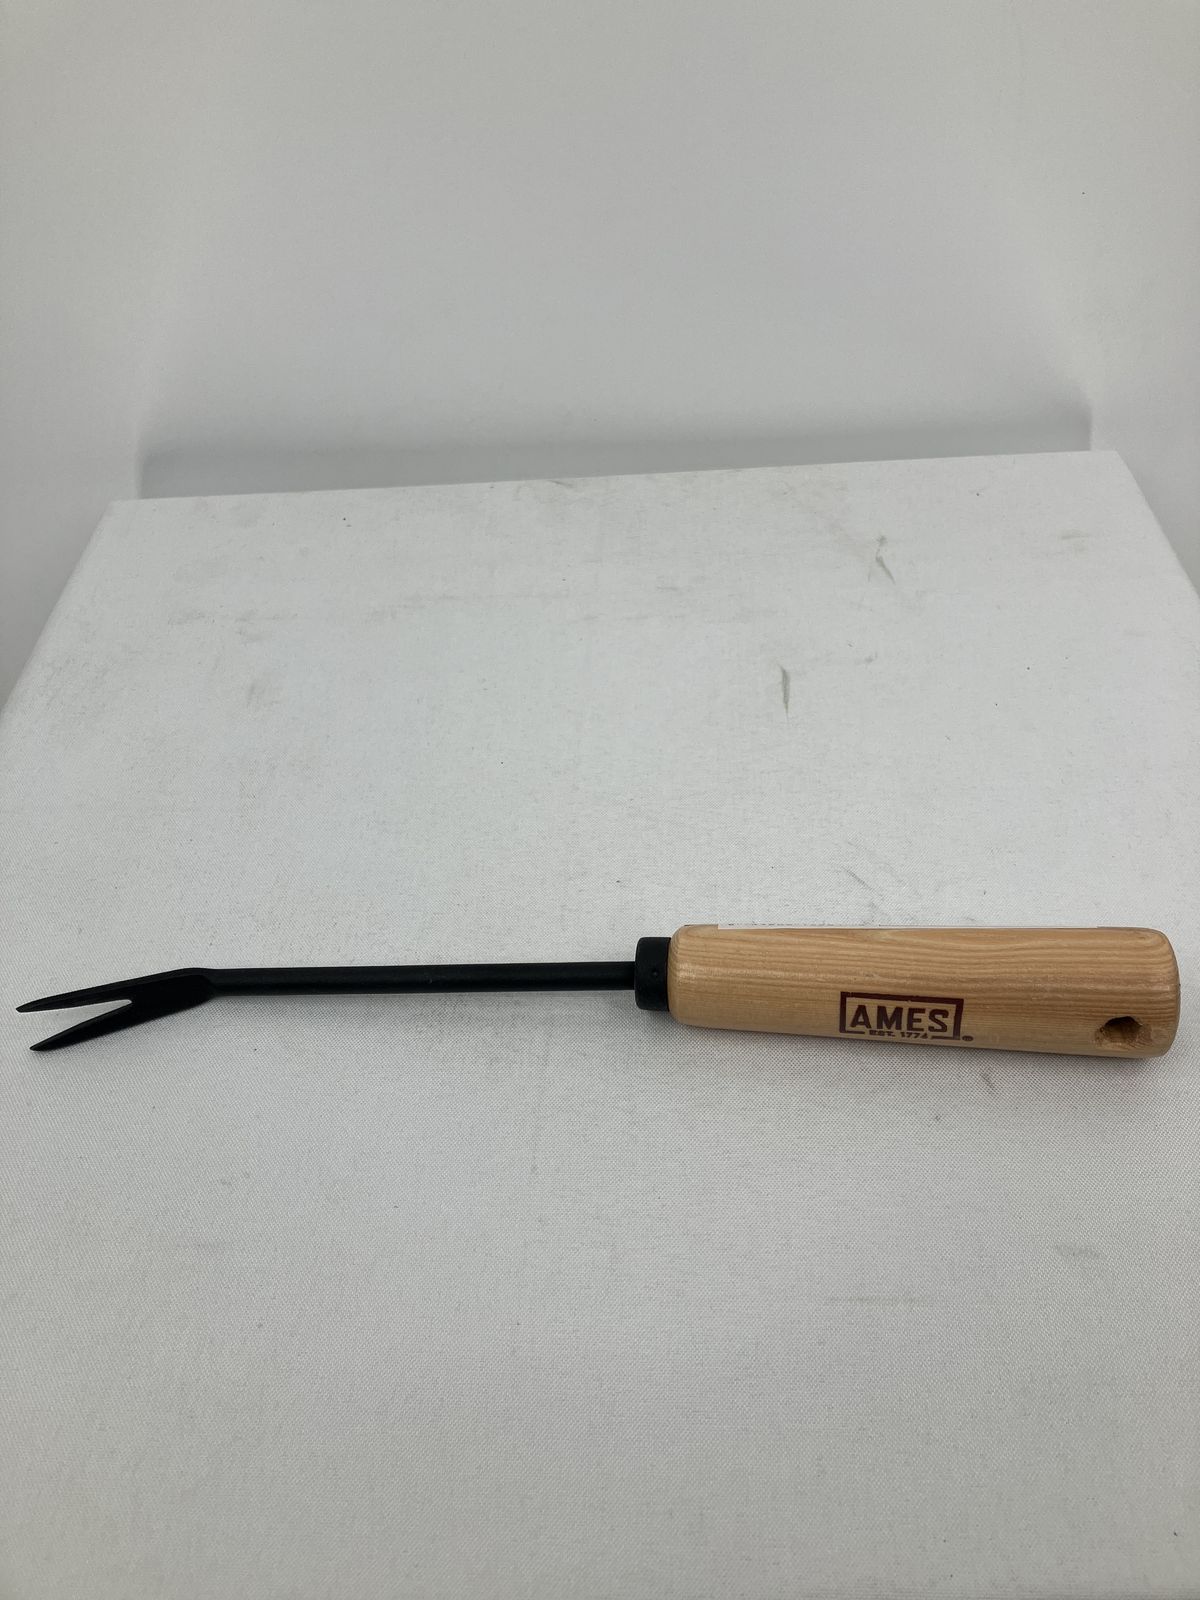 Ames Tempered Steel Hand Weeder With Wood Handle, 12 Inch, #2447000 New